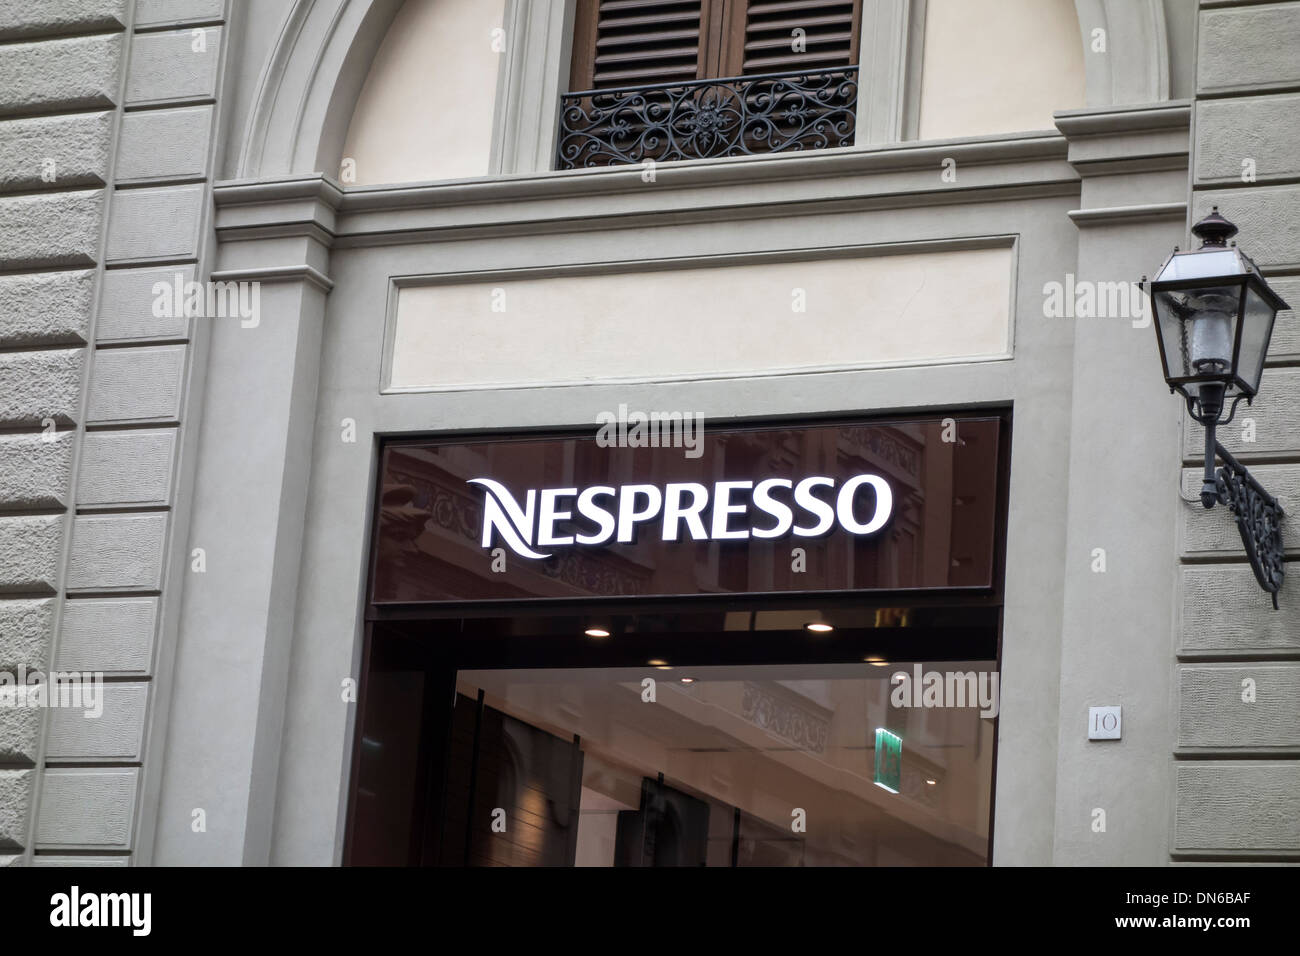 Nespresso Sign on the wall in Rome, Italy Stock Photo